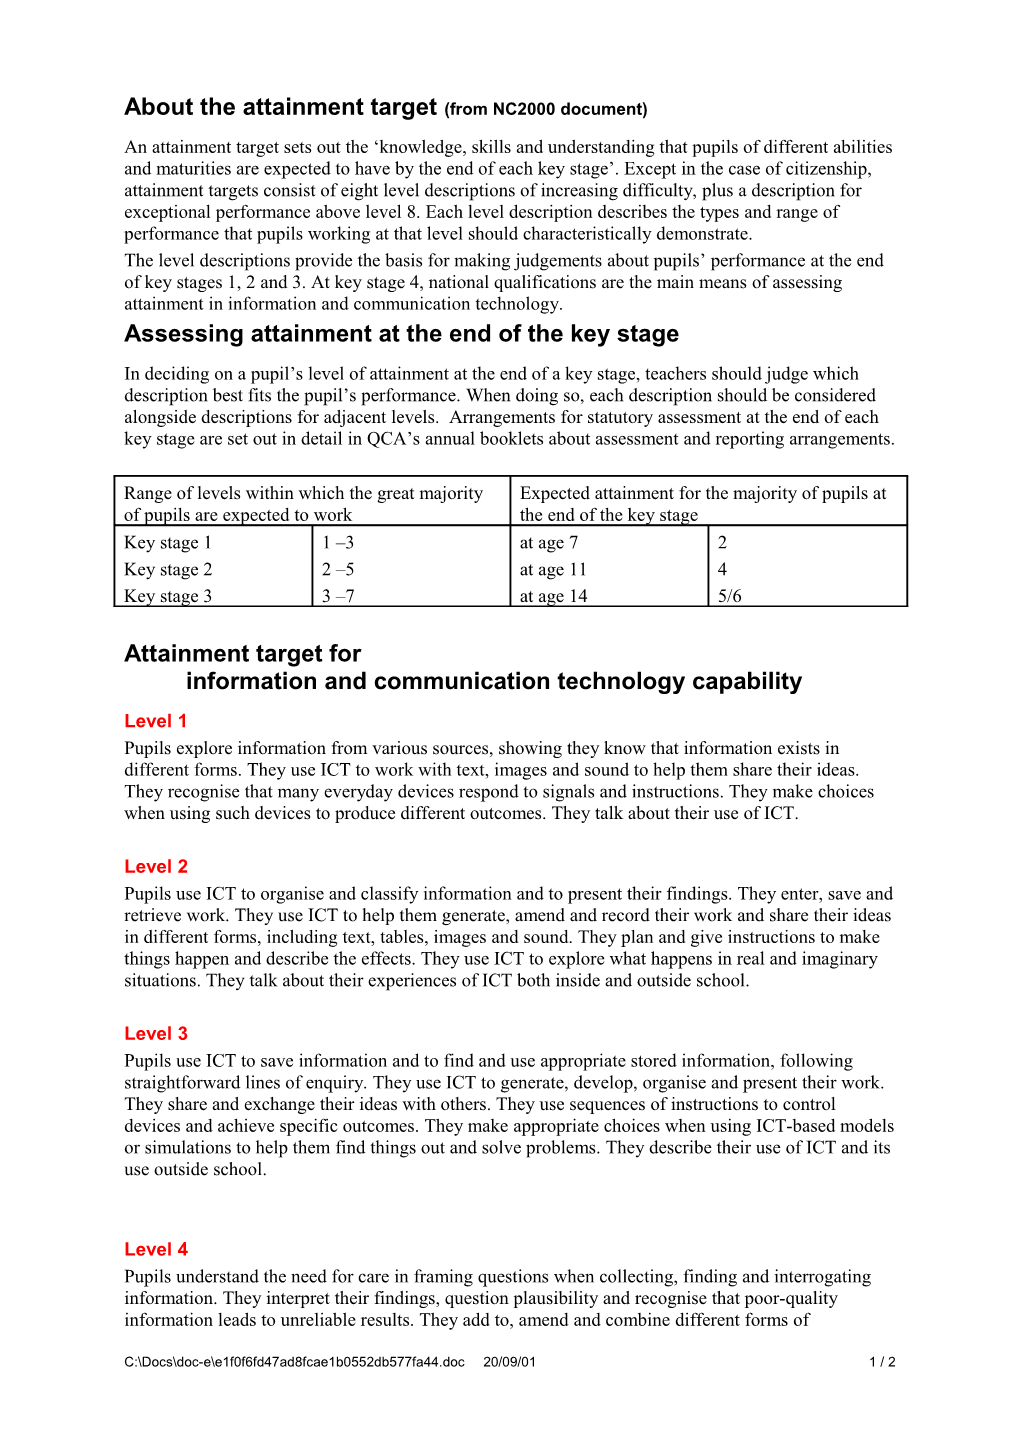 Attainment Target for Informationand Communication Technology Capability